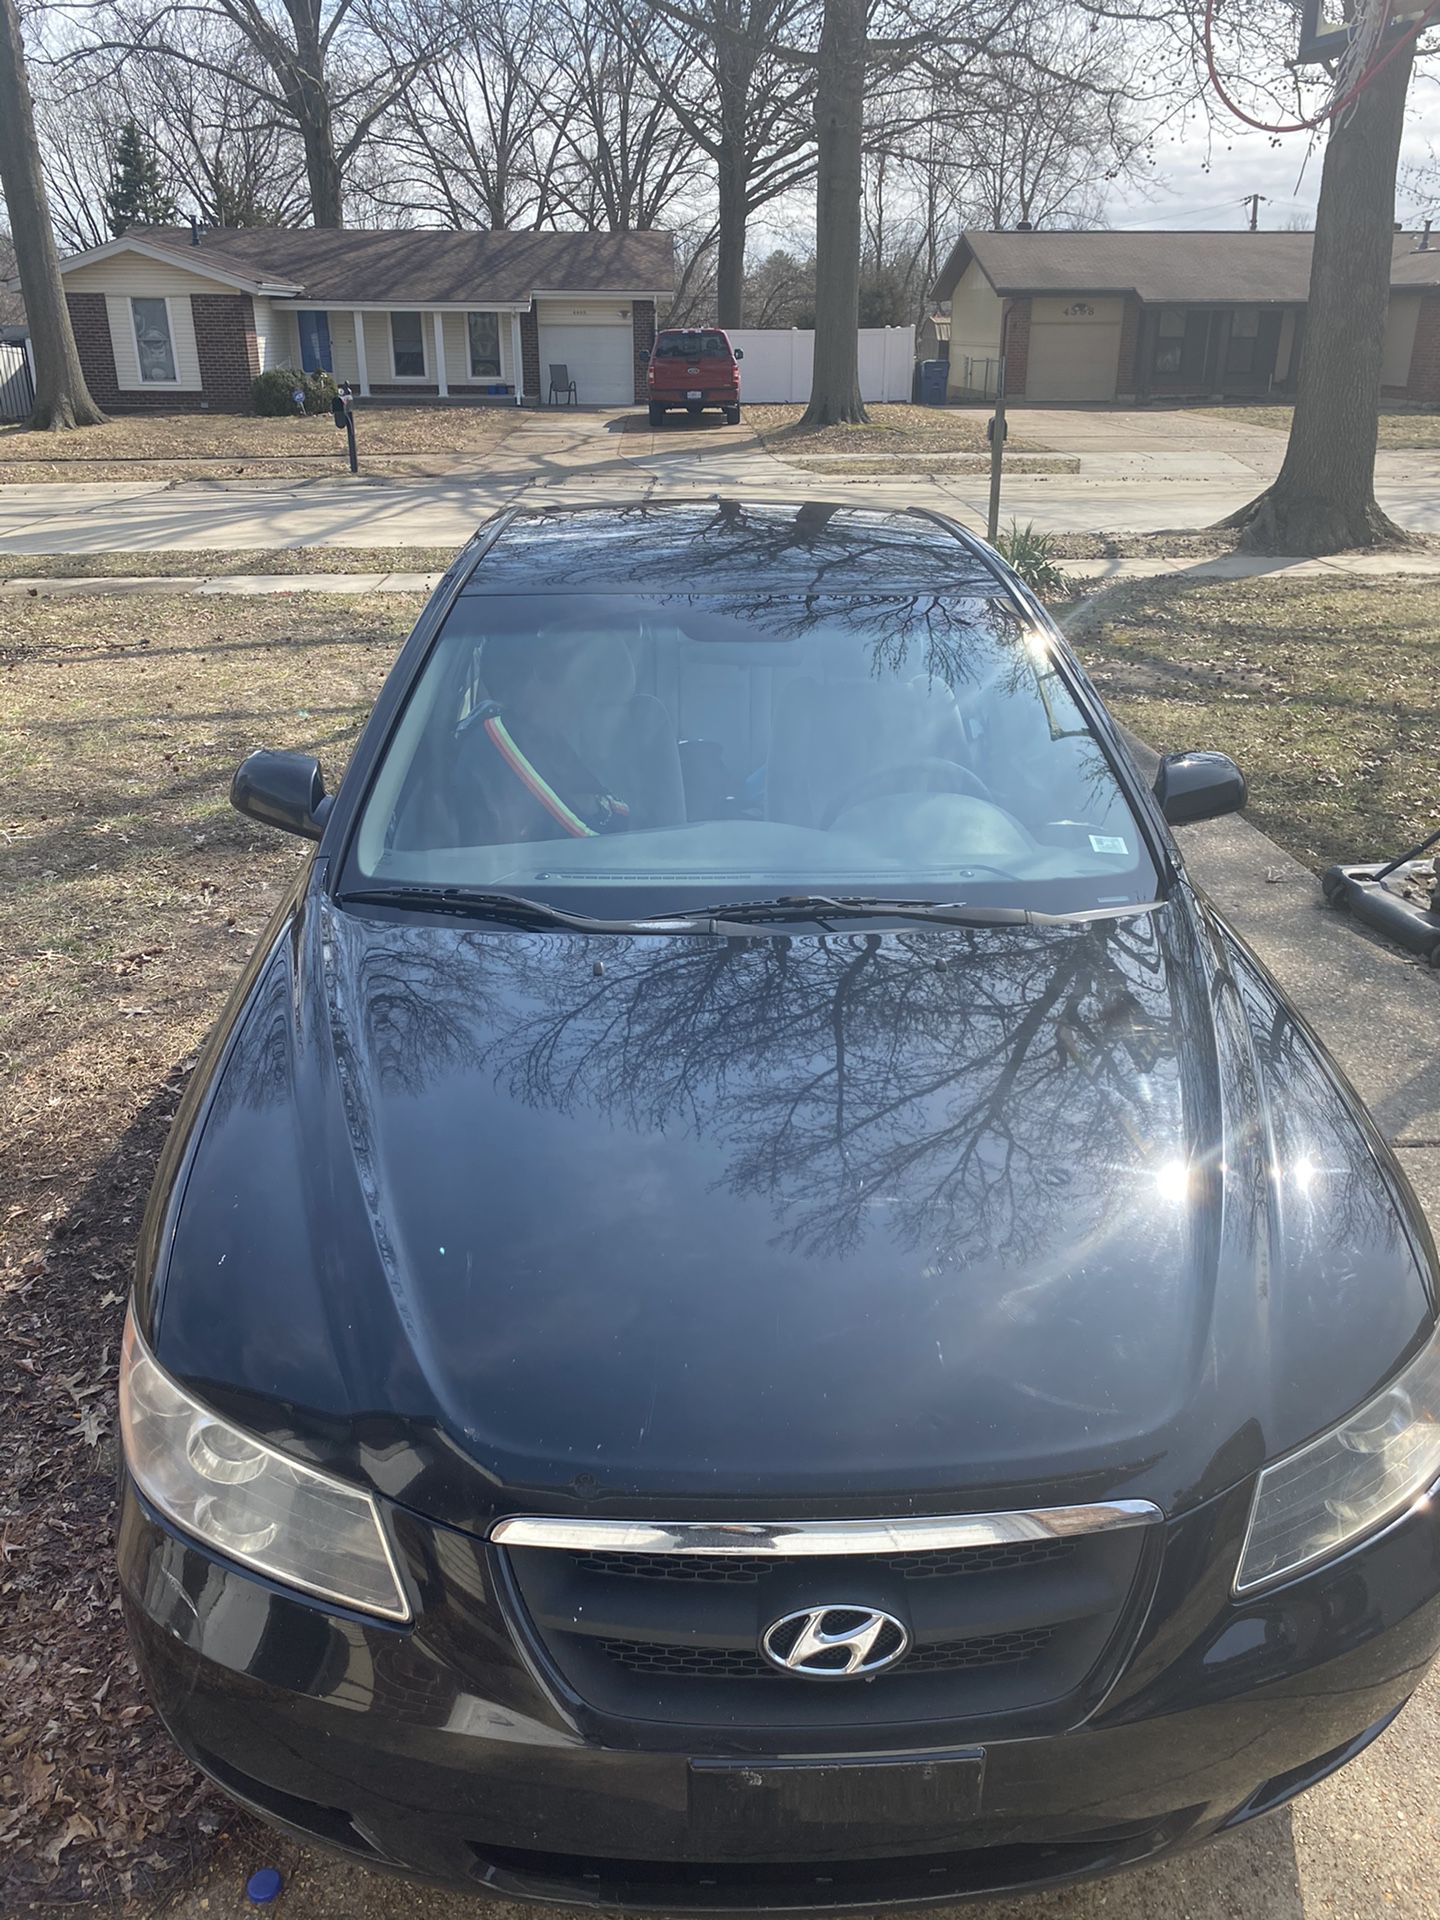 2009 Hyundai sonata just needs a starter to be your everyday car!